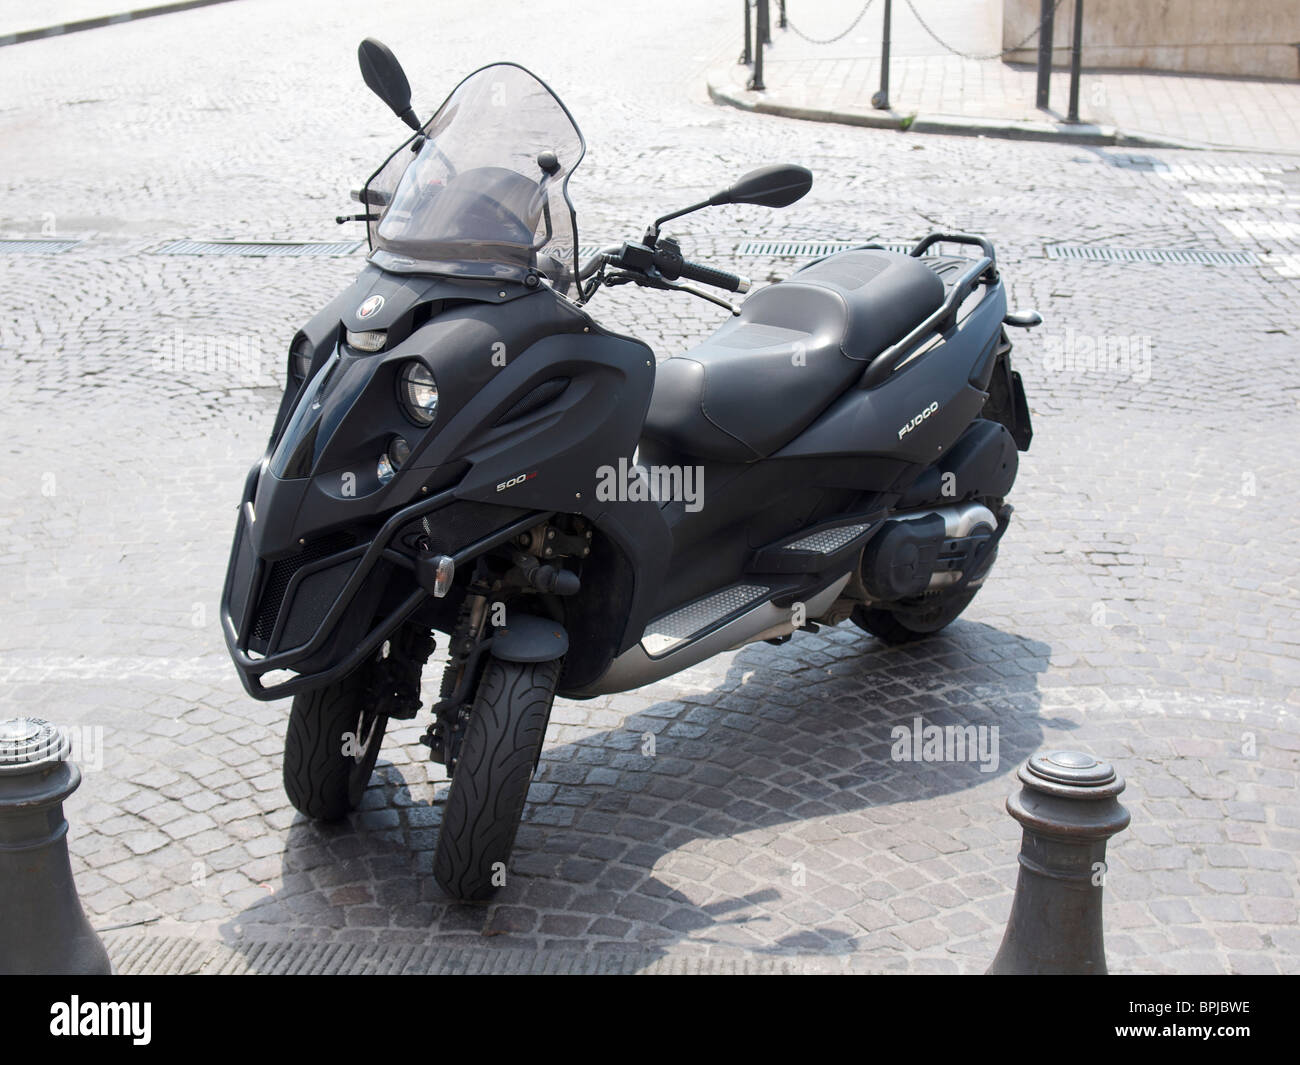 Gilera Fuoco 500ie a new kind of scooter motorcycle that has two front  wheels. Pisa, Tuscany, Italy Stock Photo - Alamy